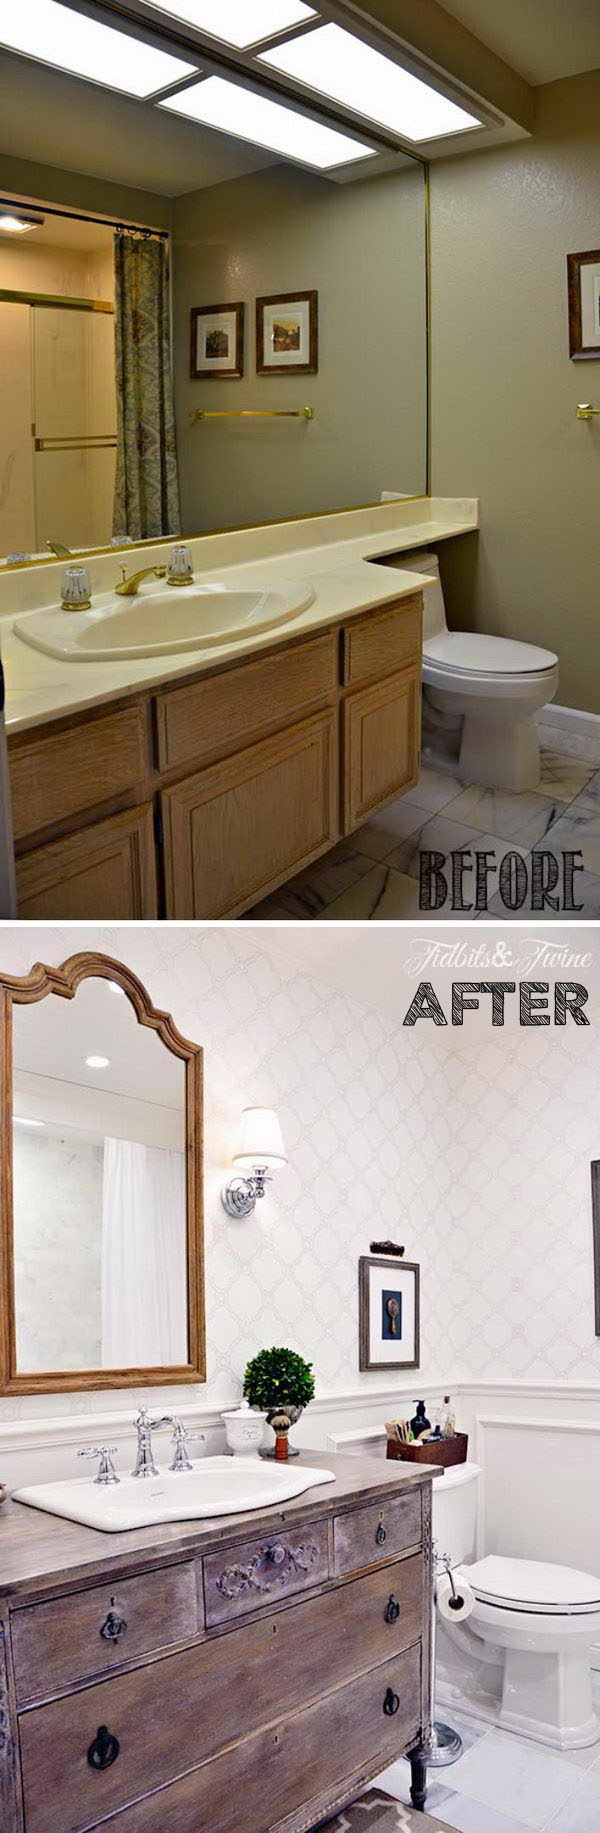 Farmhouse Bathroom Renovation with Wooden Antique Vanity Adding Warmth and Wallpaper Creating The Look of Classic . 